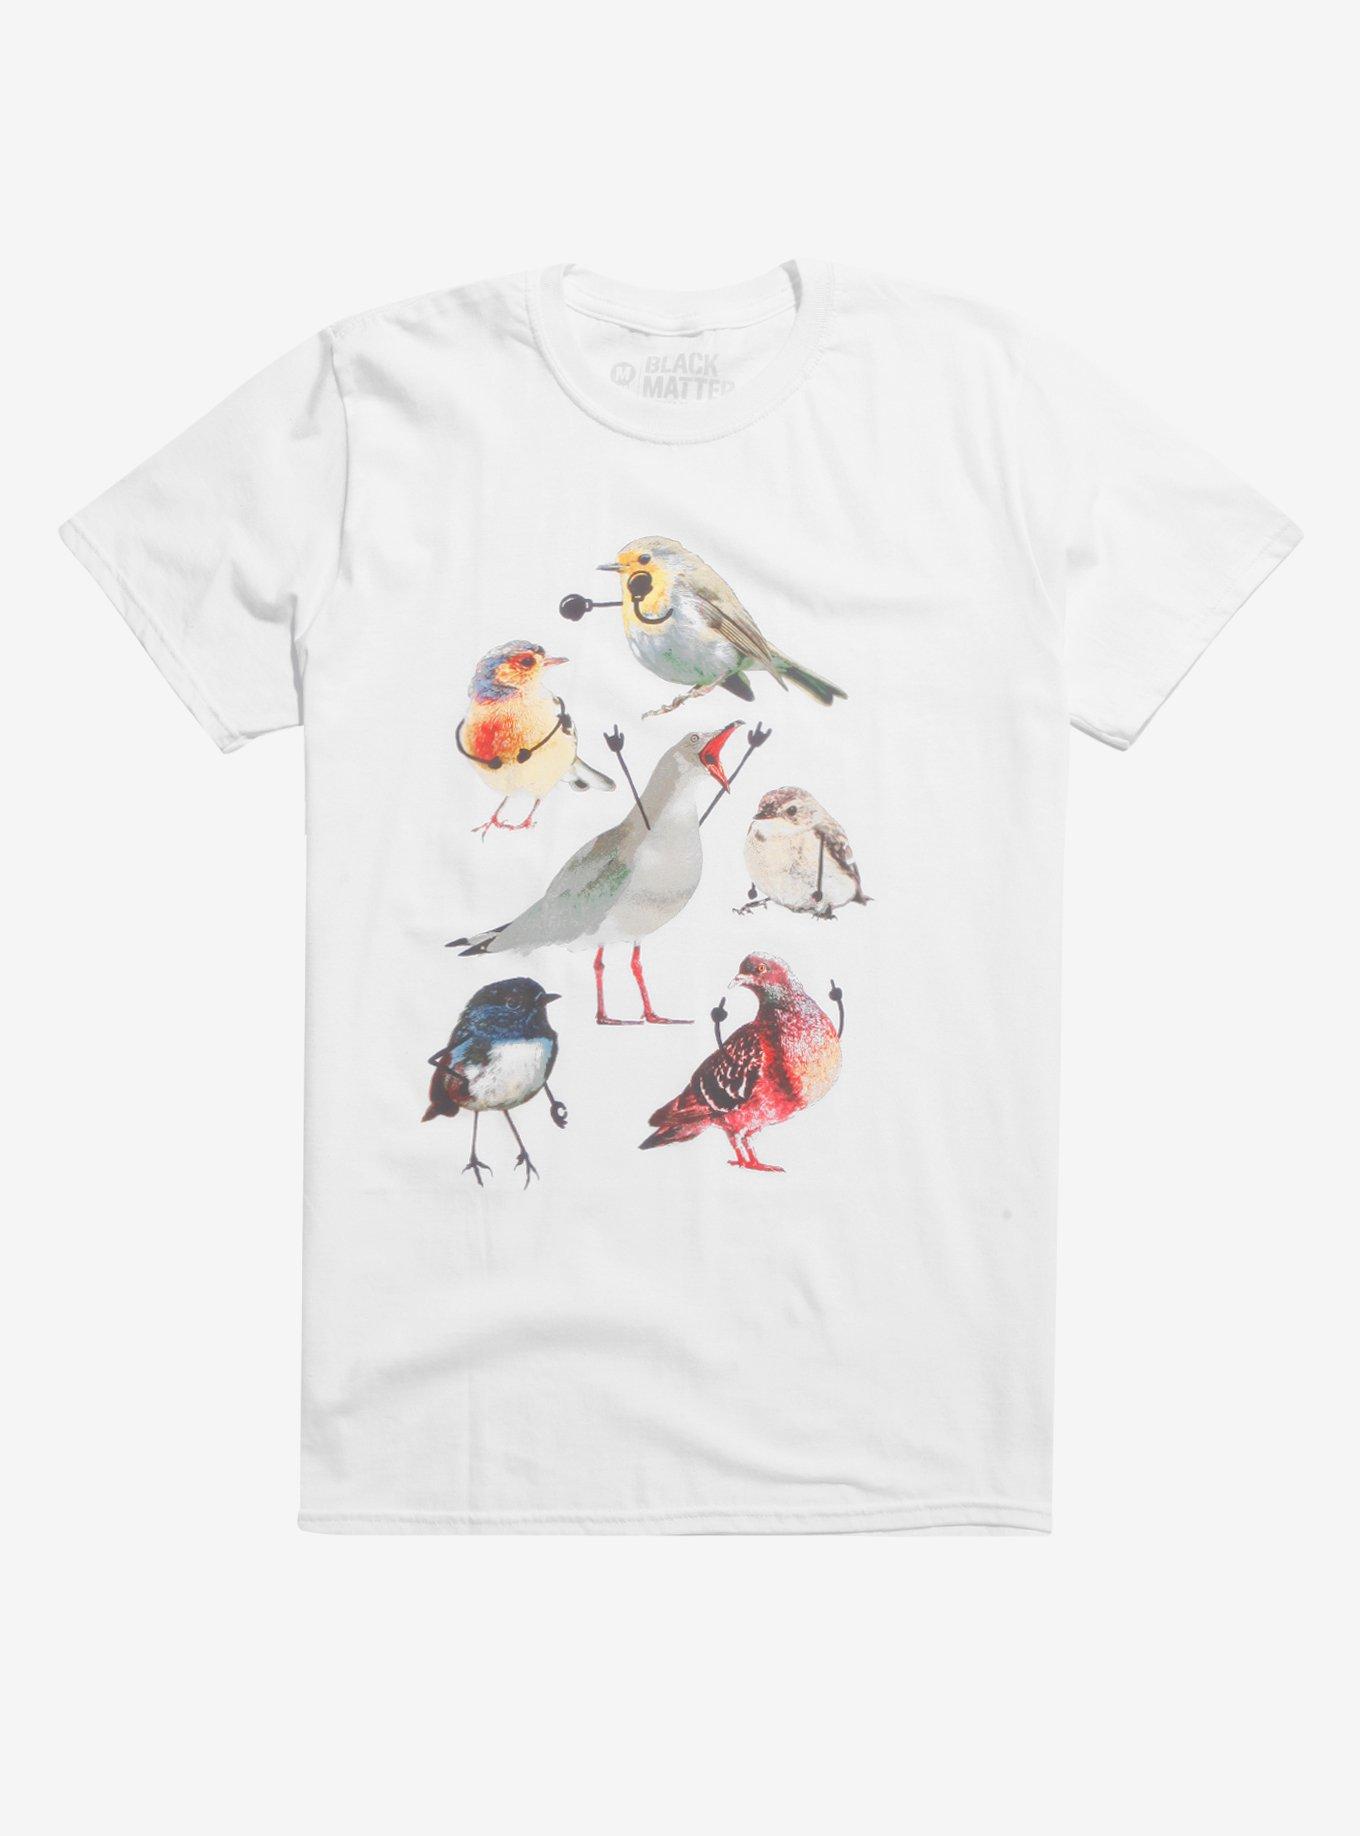 Birds With Arms T-Shirt | Hot Topic